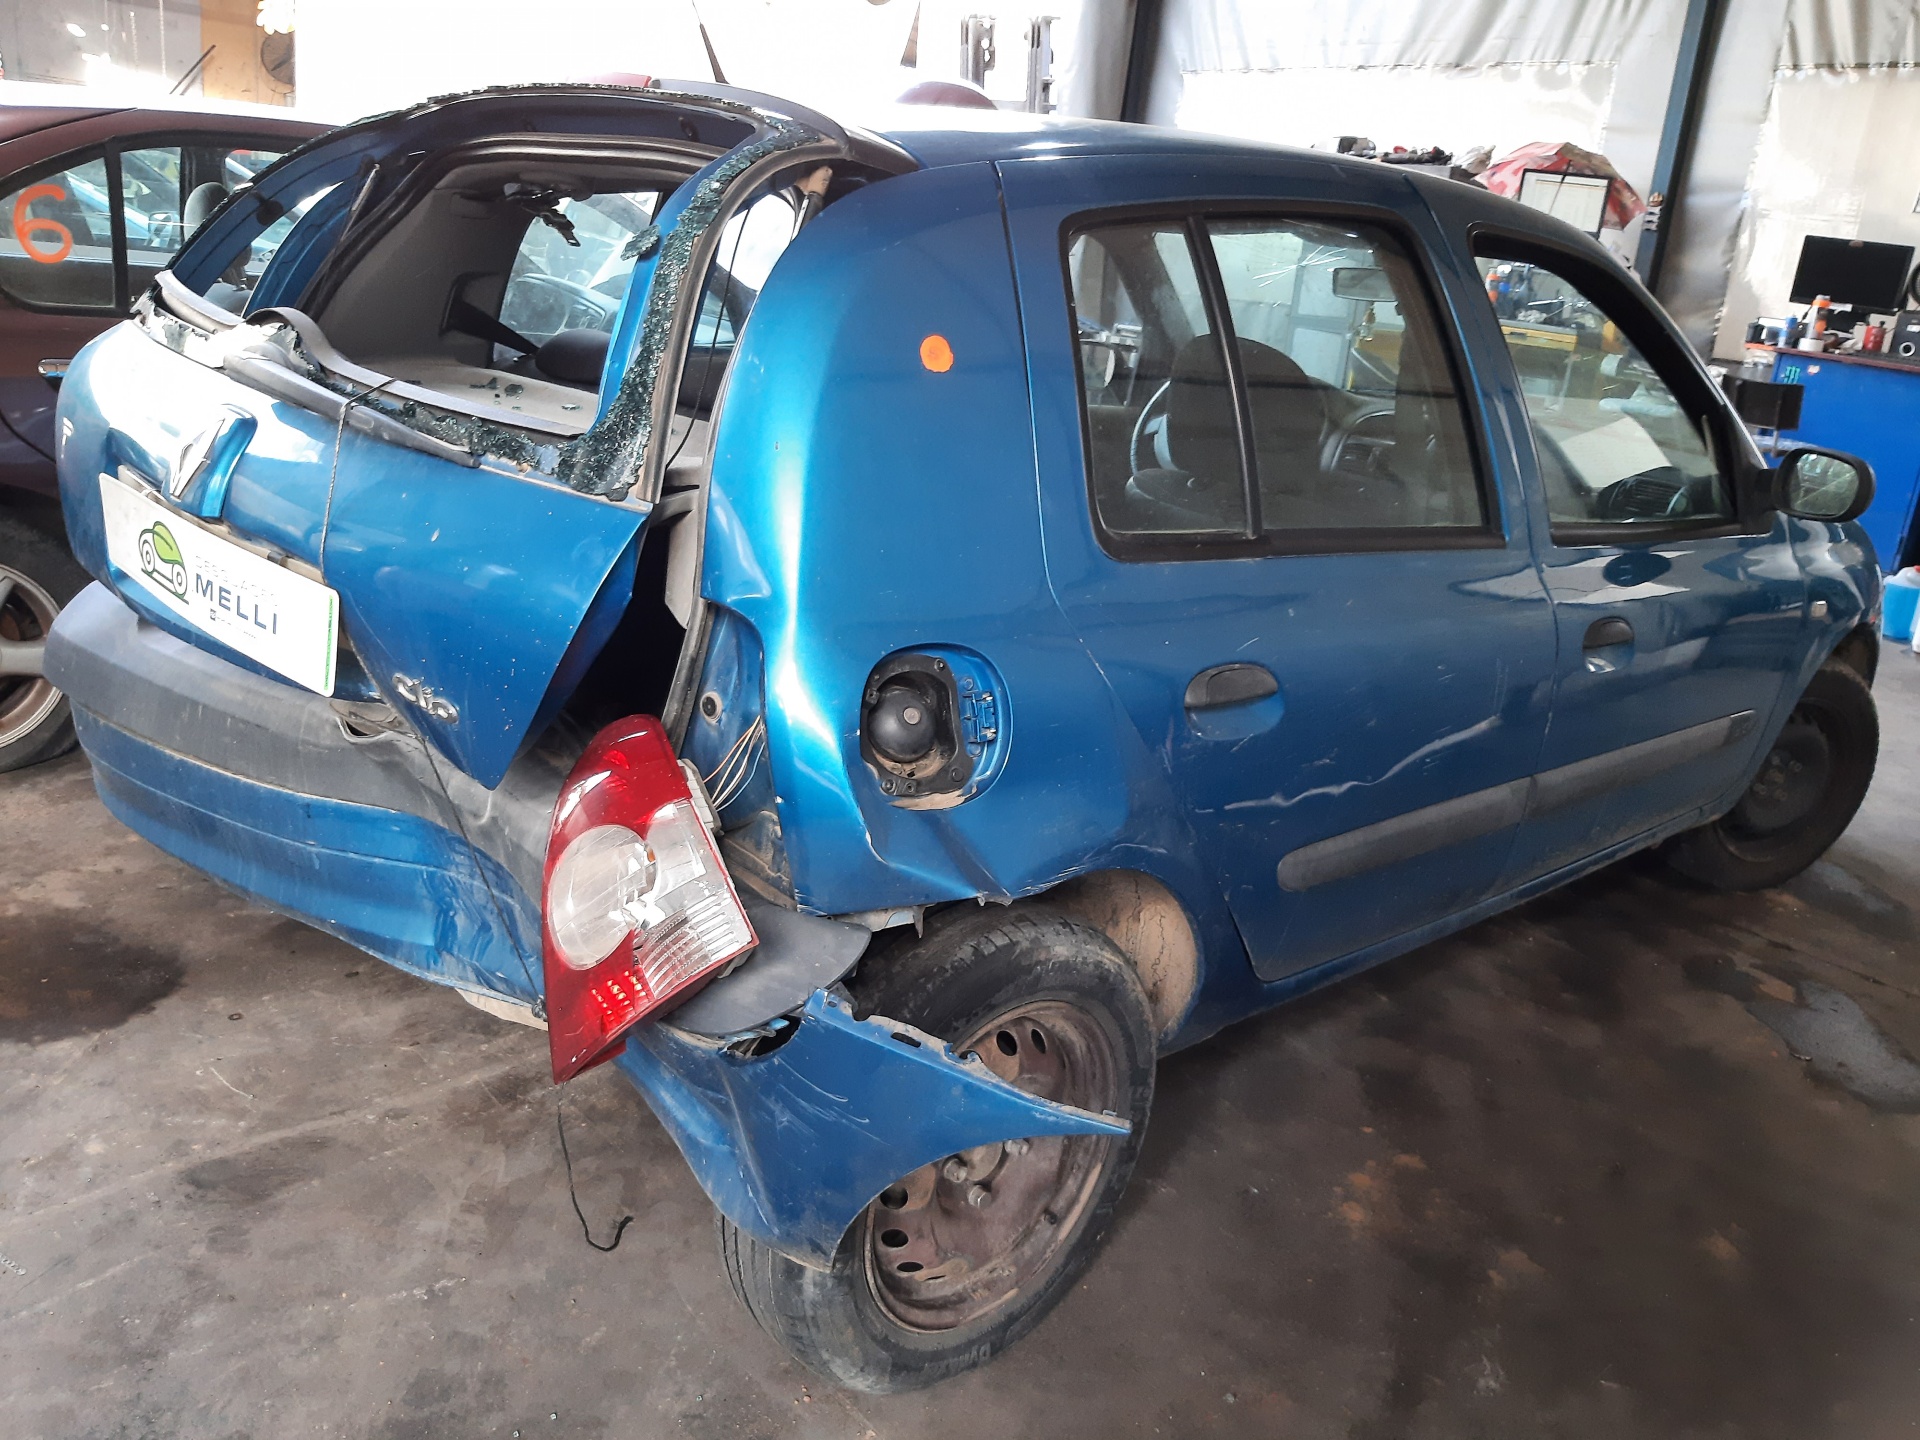 RENAULT Clio 3 generation (2005-2012) Other Interior Parts 8200028364A 23705886